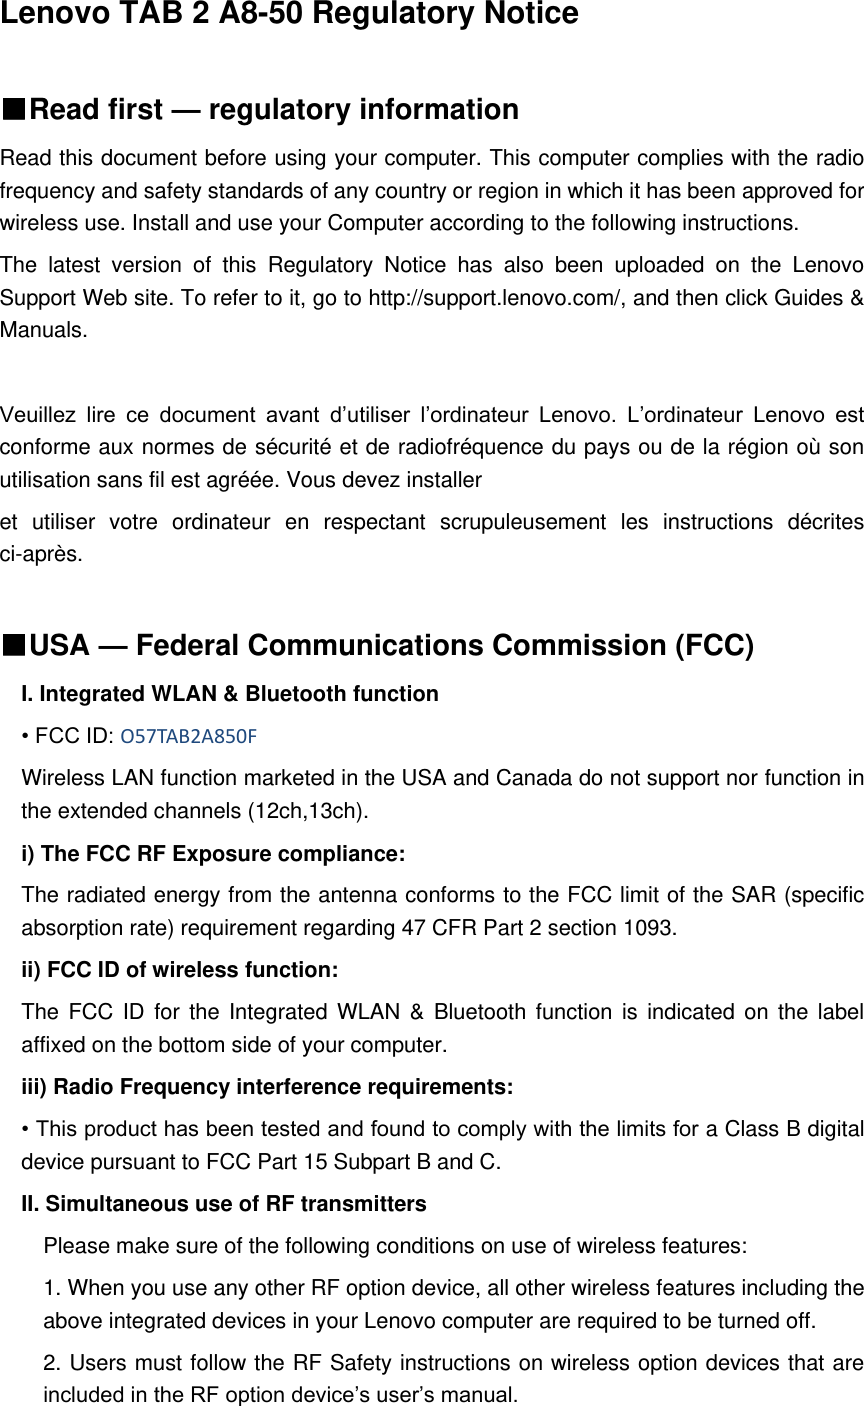 Lenovo TAB 2 A8-50 Regulatory Notice    ■Read first — regulatory information Read this document before using your computer. This computer complies with the radio frequency and safety standards of any country or region in which it has been approved for wireless use. Install and use your Computer according to the following instructions.   The  latest  version  of  this  Regulatory  Notice  has  also  been  uploaded  on  the  Lenovo Support Web site. To refer to it, go to http://support.lenovo.com/, and then click Guides &amp; Manuals.  Veuillez  lire  ce  document  avant  d’utiliser  l’ordinateur  Lenovo.  L’ordinateur  Lenovo  est conforme aux normes de sécurité et de radiofréquence du pays ou de la région où son utilisation sans fil est agréée. Vous devez installer   et  utiliser  votre  ordinateur  en  respectant  scrupuleusement  les  instructions  décrites ci-après.  ■USA — Federal Communications Commission (FCC)   I. Integrated WLAN &amp; Bluetooth function • FCC ID: O57TAB2A850F Wireless LAN function marketed in the USA and Canada do not support nor function in the extended channels (12ch,13ch). i) The FCC RF Exposure compliance: The radiated energy from the antenna conforms to the FCC limit of the SAR (specific absorption rate) requirement regarding 47 CFR Part 2 section 1093. ii) FCC ID of wireless function: The FCC  ID for the Integrated WLAN  &amp;  Bluetooth function  is  indicated on  the label affixed on the bottom side of your computer. iii) Radio Frequency interference requirements: • This product has been tested and found to comply with the limits for a Class B digital device pursuant to FCC Part 15 Subpart B and C. II. Simultaneous use of RF transmitters Please make sure of the following conditions on use of wireless features: 1. When you use any other RF option device, all other wireless features including the above integrated devices in your Lenovo computer are required to be turned off. 2. Users must follow the RF Safety instructions on wireless option devices that are included in the RF option device’s user’s manual. 